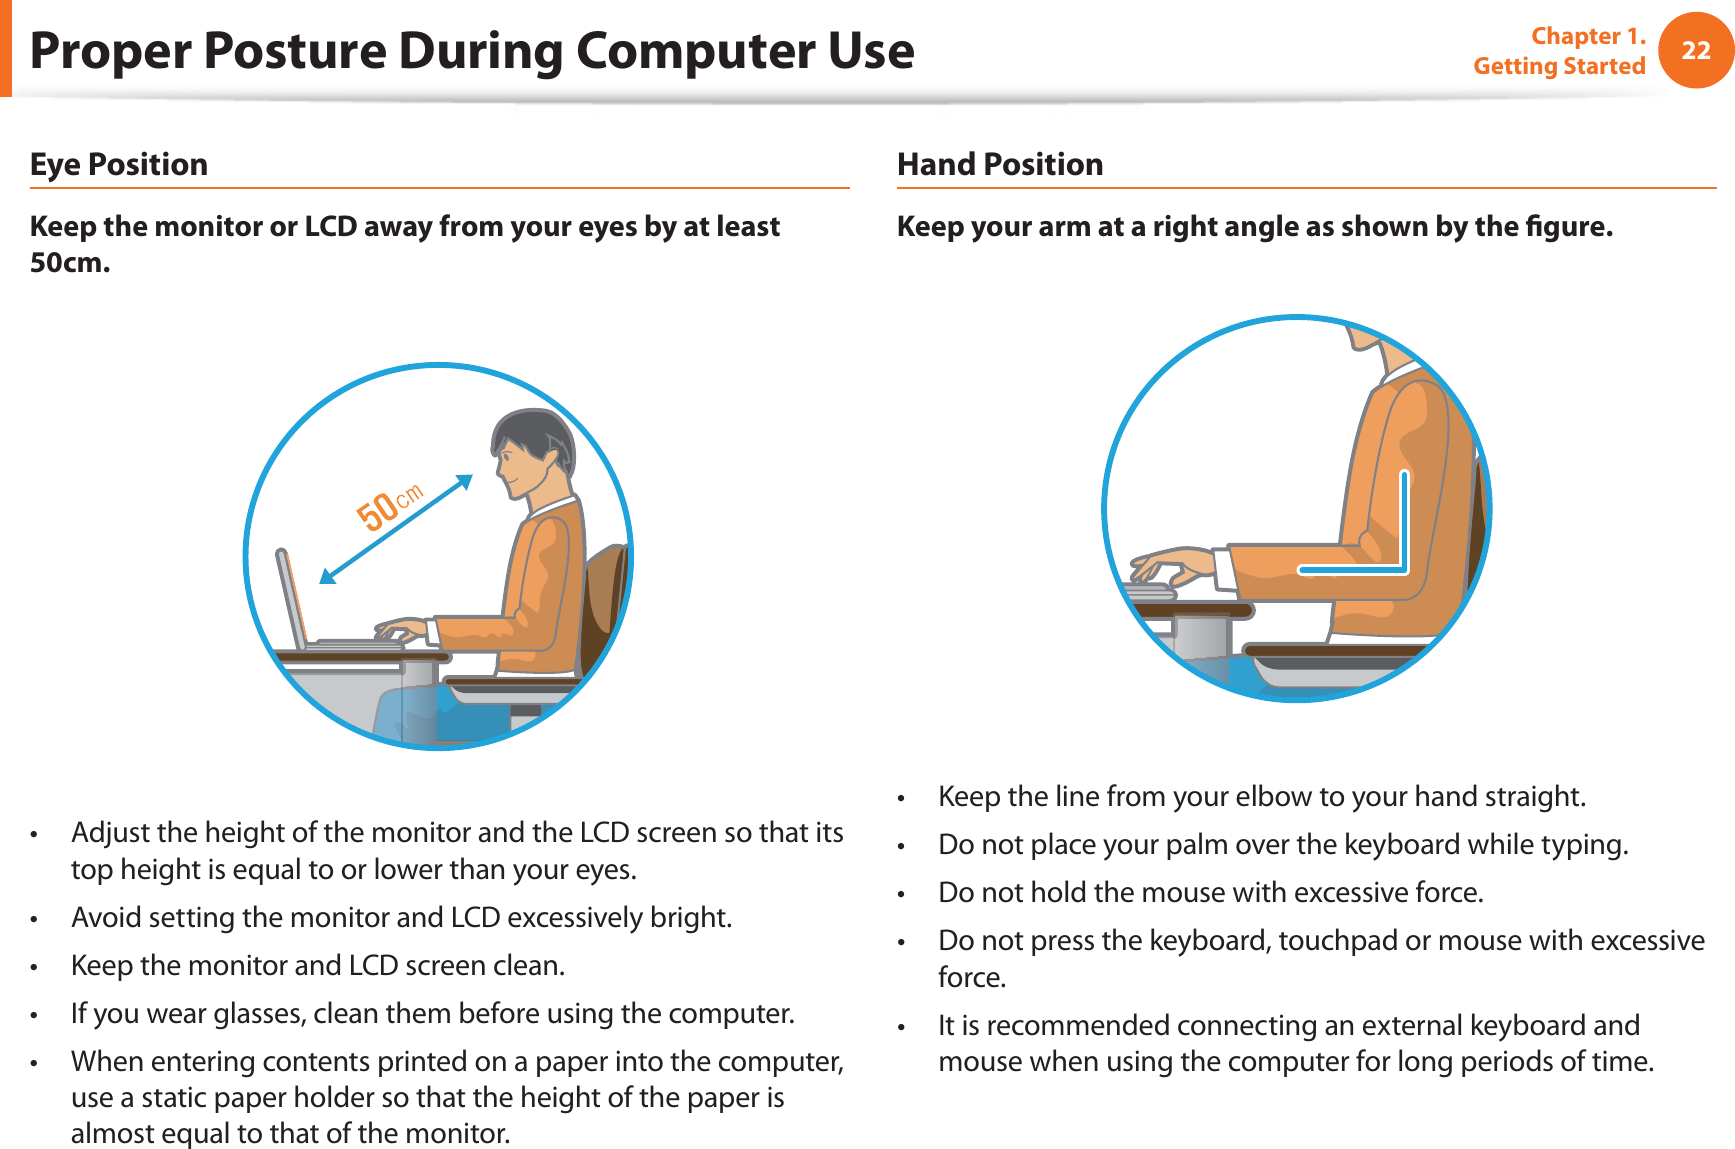 22Chapter 1. Getting StartedProper Posture During Computer UseEye PositionKeep the monitor or LCD away from your eyes by at least 50cm.Adjust the height of the monitor and the LCD screen so that its t top height is equal to or lower than your eyes.Avoid setting the monitor and LCD excessively bright.t Keep the monitor and LCD screen clean.t If you wear glasses, clean them before using the computer.t When entering contents printed on a paper into the computer, t use a static paper holder so that the height of the paper is almost equal to that of the monitor.Hand PositionKeep your arm at a right angle as shown by the ﬁ gure.Keep the line from your elbow to your hand straight.t Do not place your palm over the keyboard while typing.t Do not hold the mouse with excessive force.t Do not press the keyboard, touchpad or mouse with excessive t force.It is recommended connecting an external keyboard and t mouse when using the computer for long periods of time.